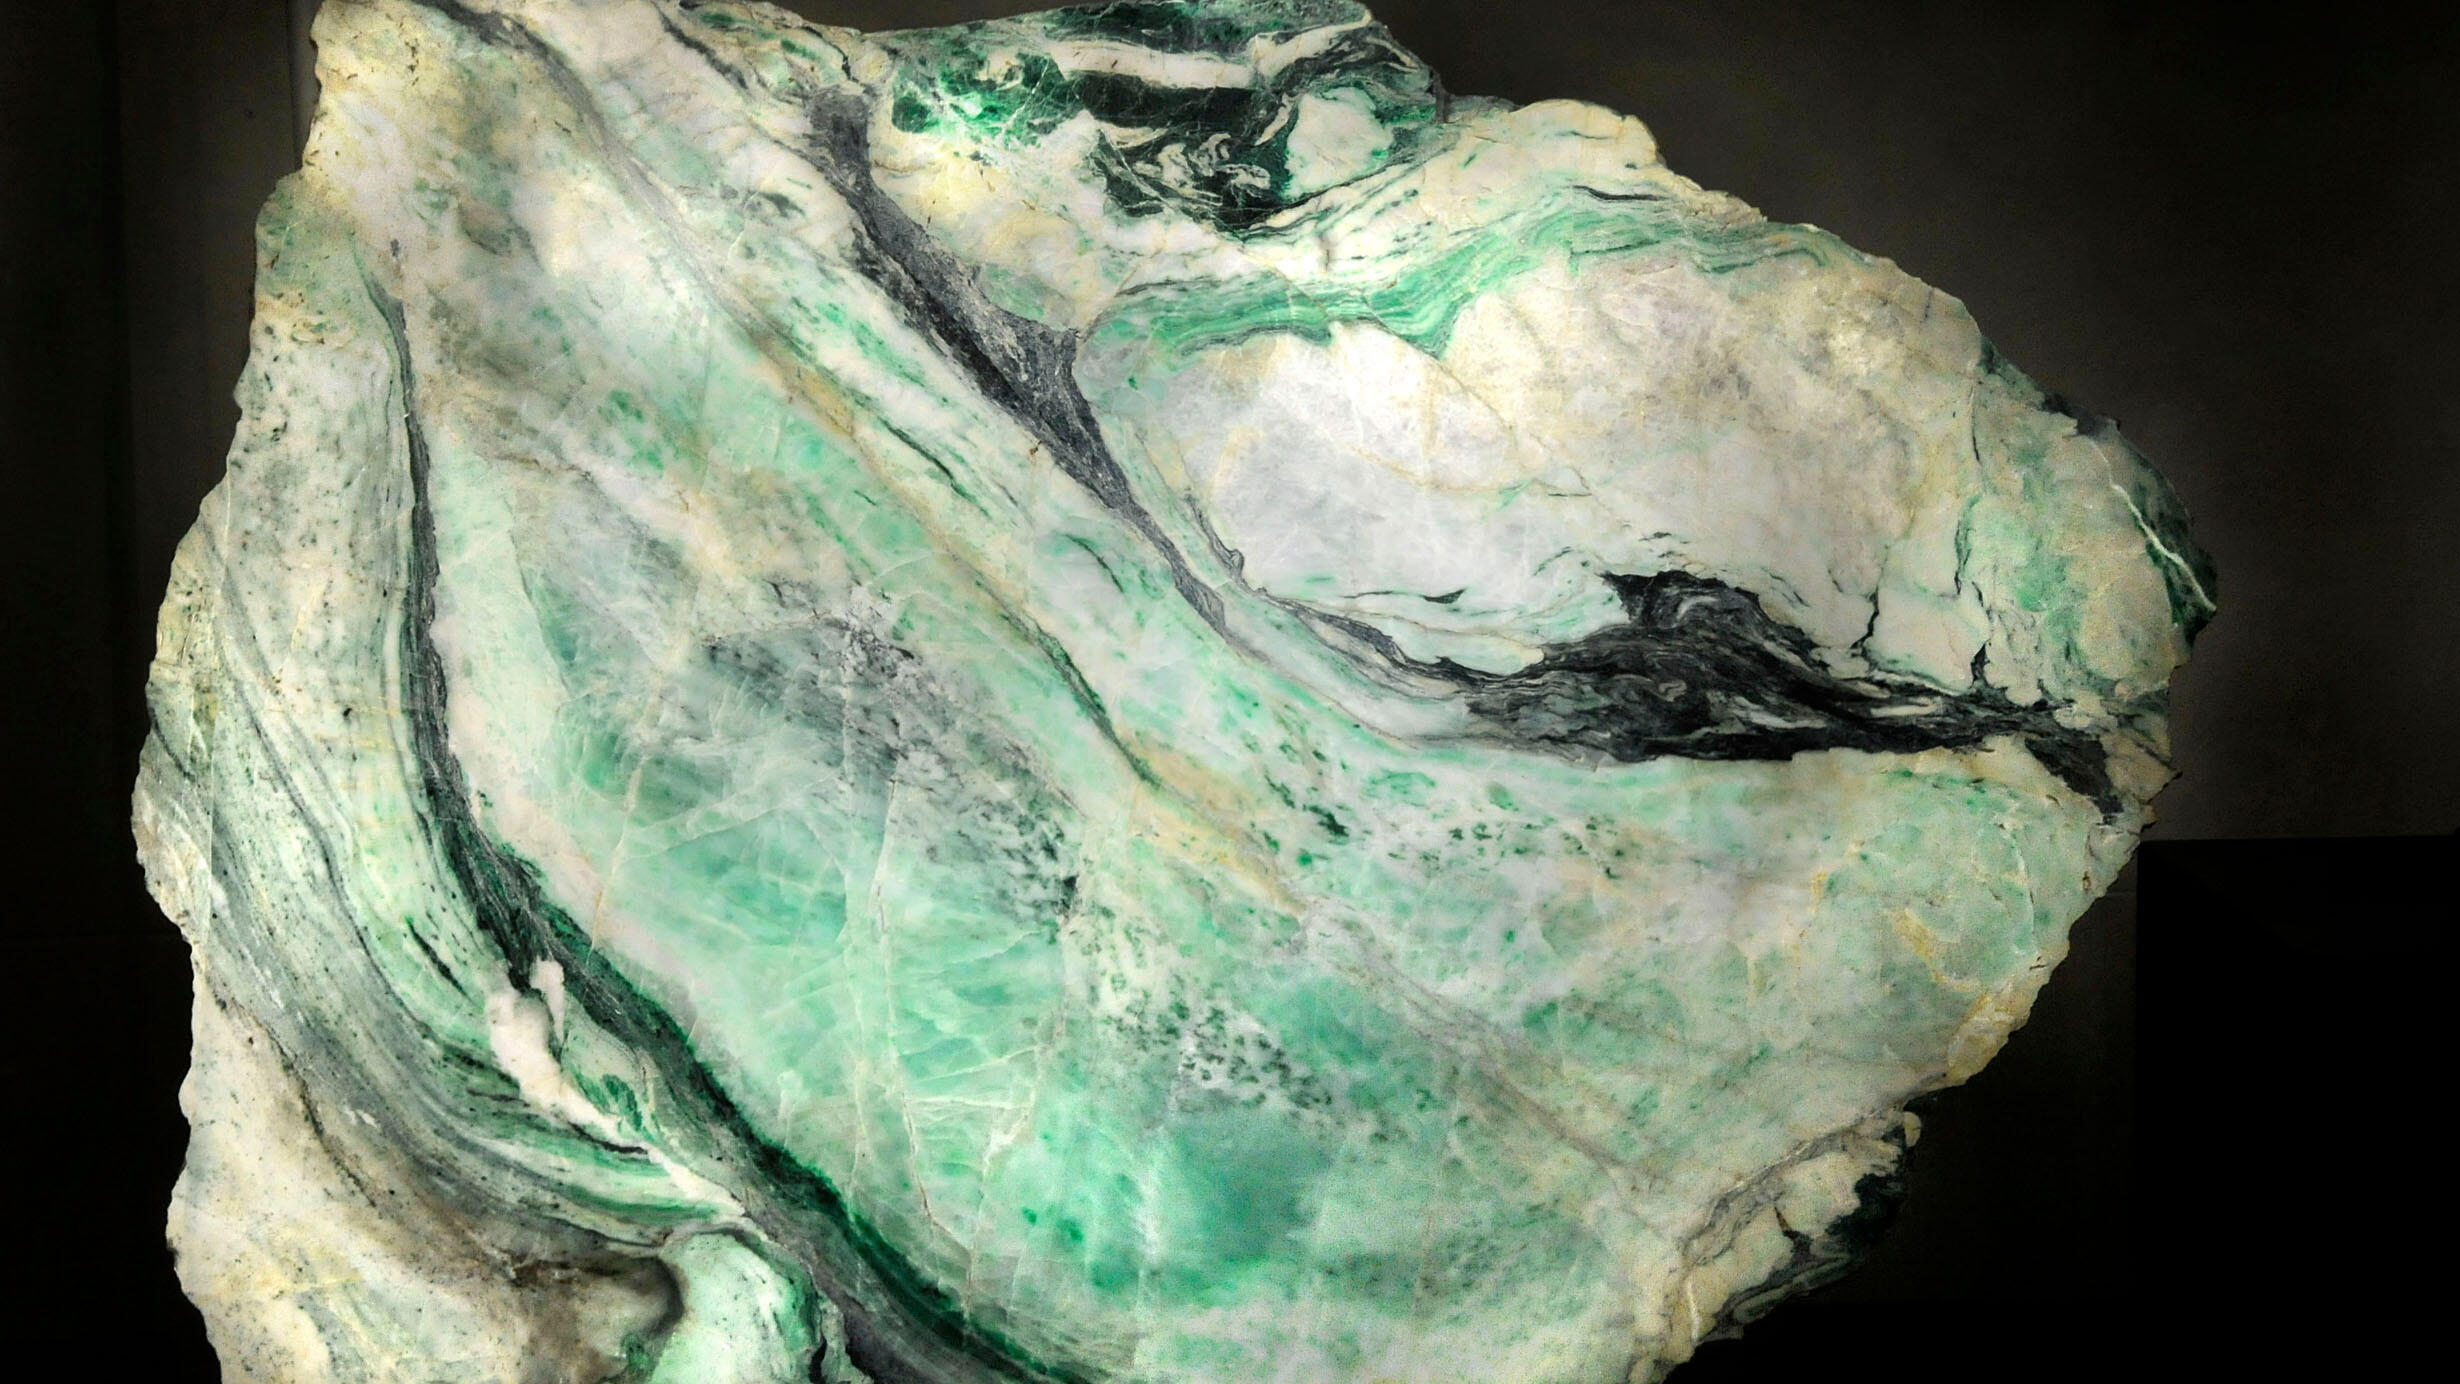 The two-foot-long slice of a jadeite jade.